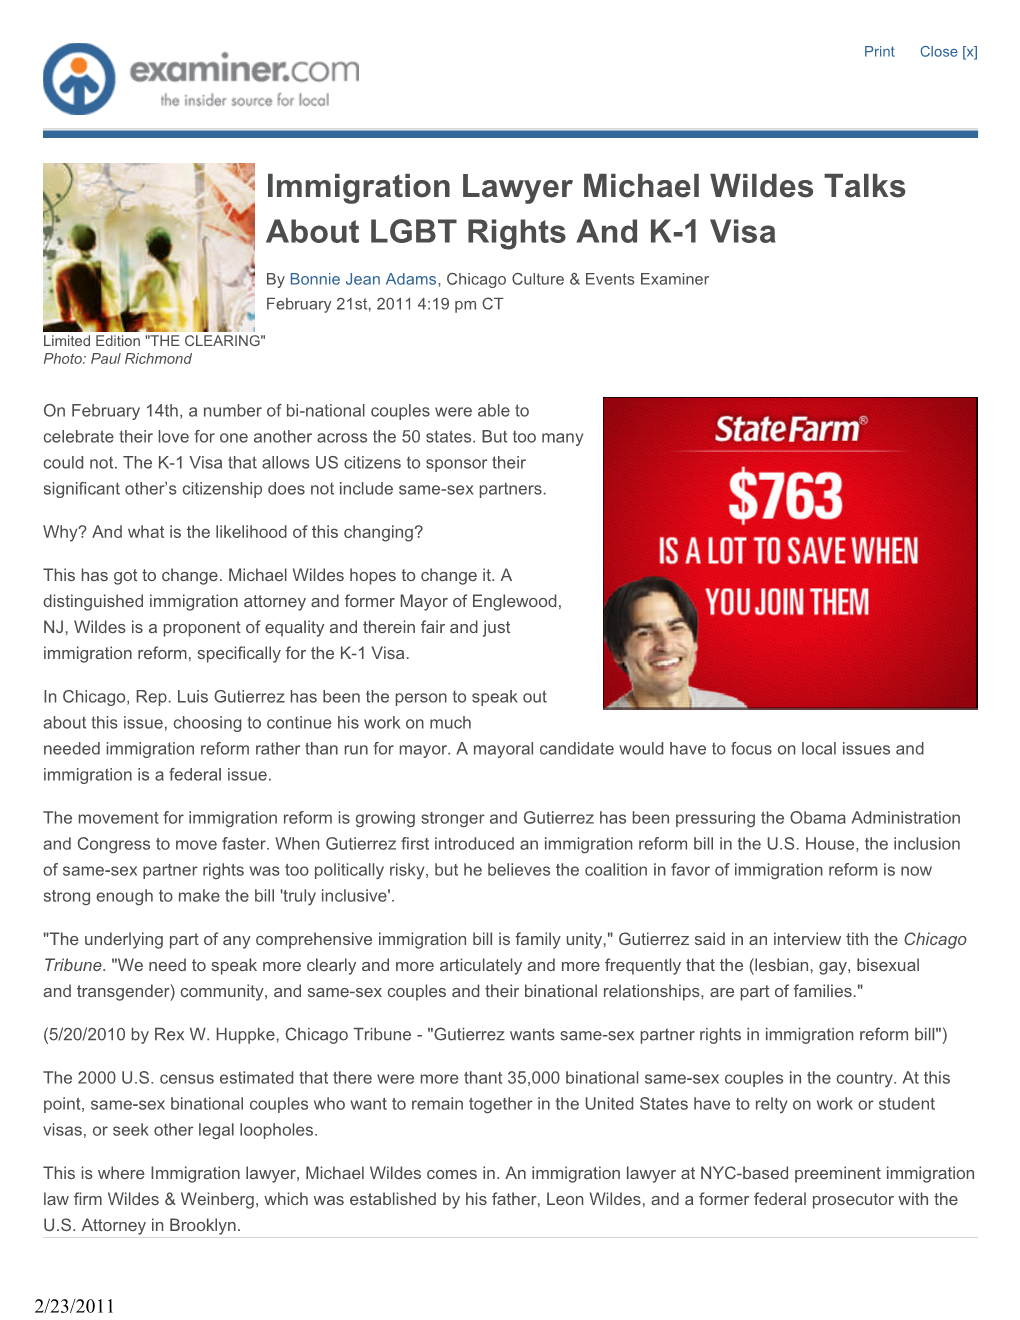 Immigration Lawyer Michael Wildes Talks About LGBT Rights and K-1 Visa